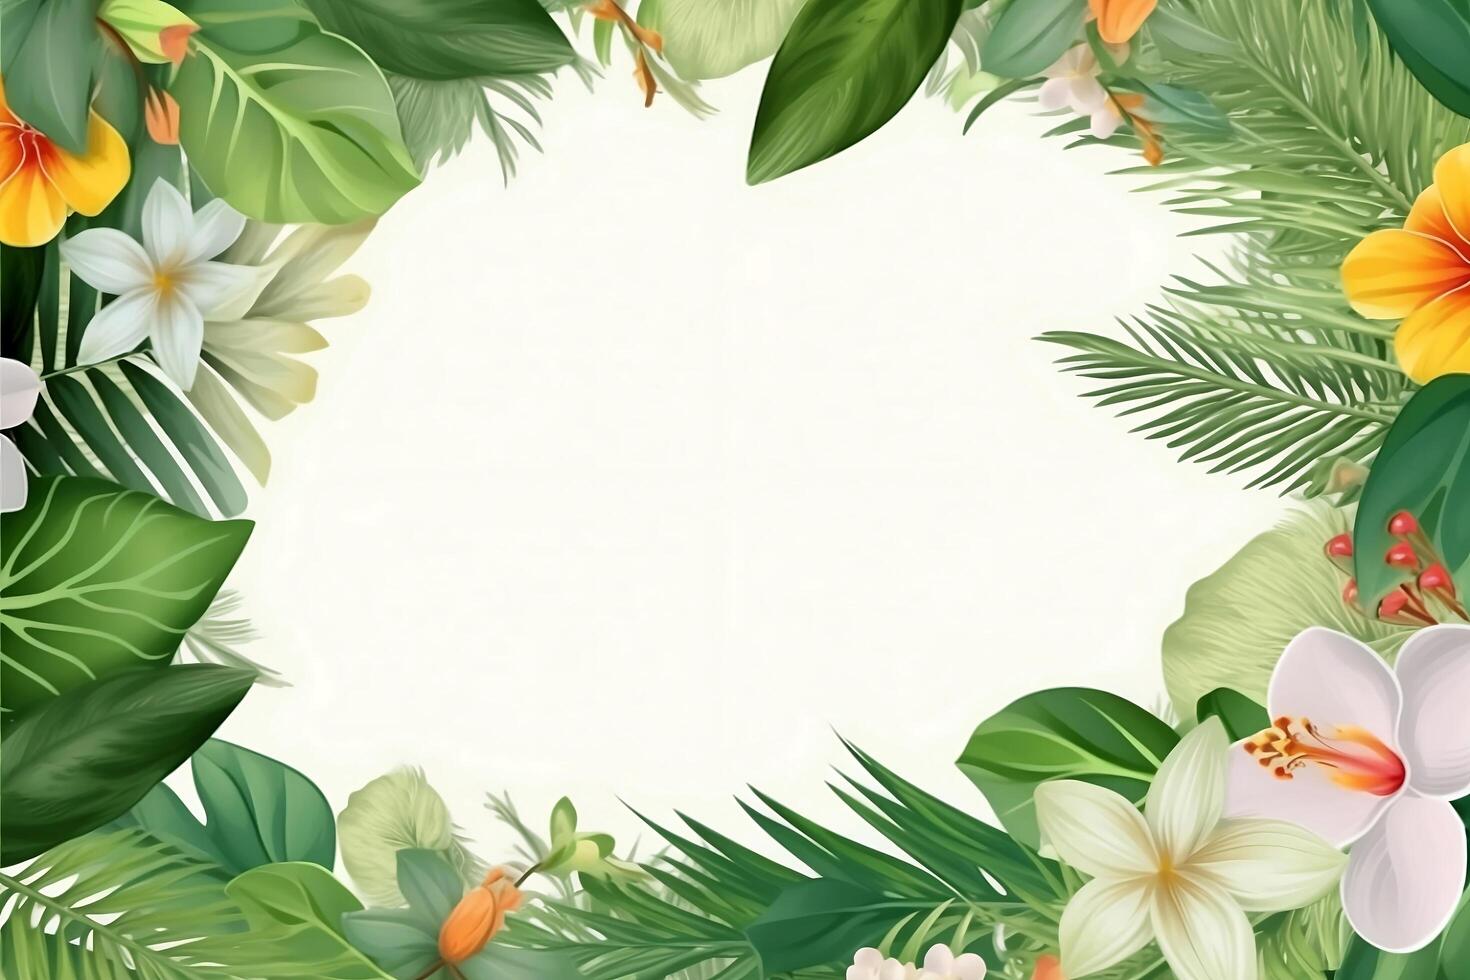 Summer Frame or Border with tropical palm leaves and flowers on white background photo